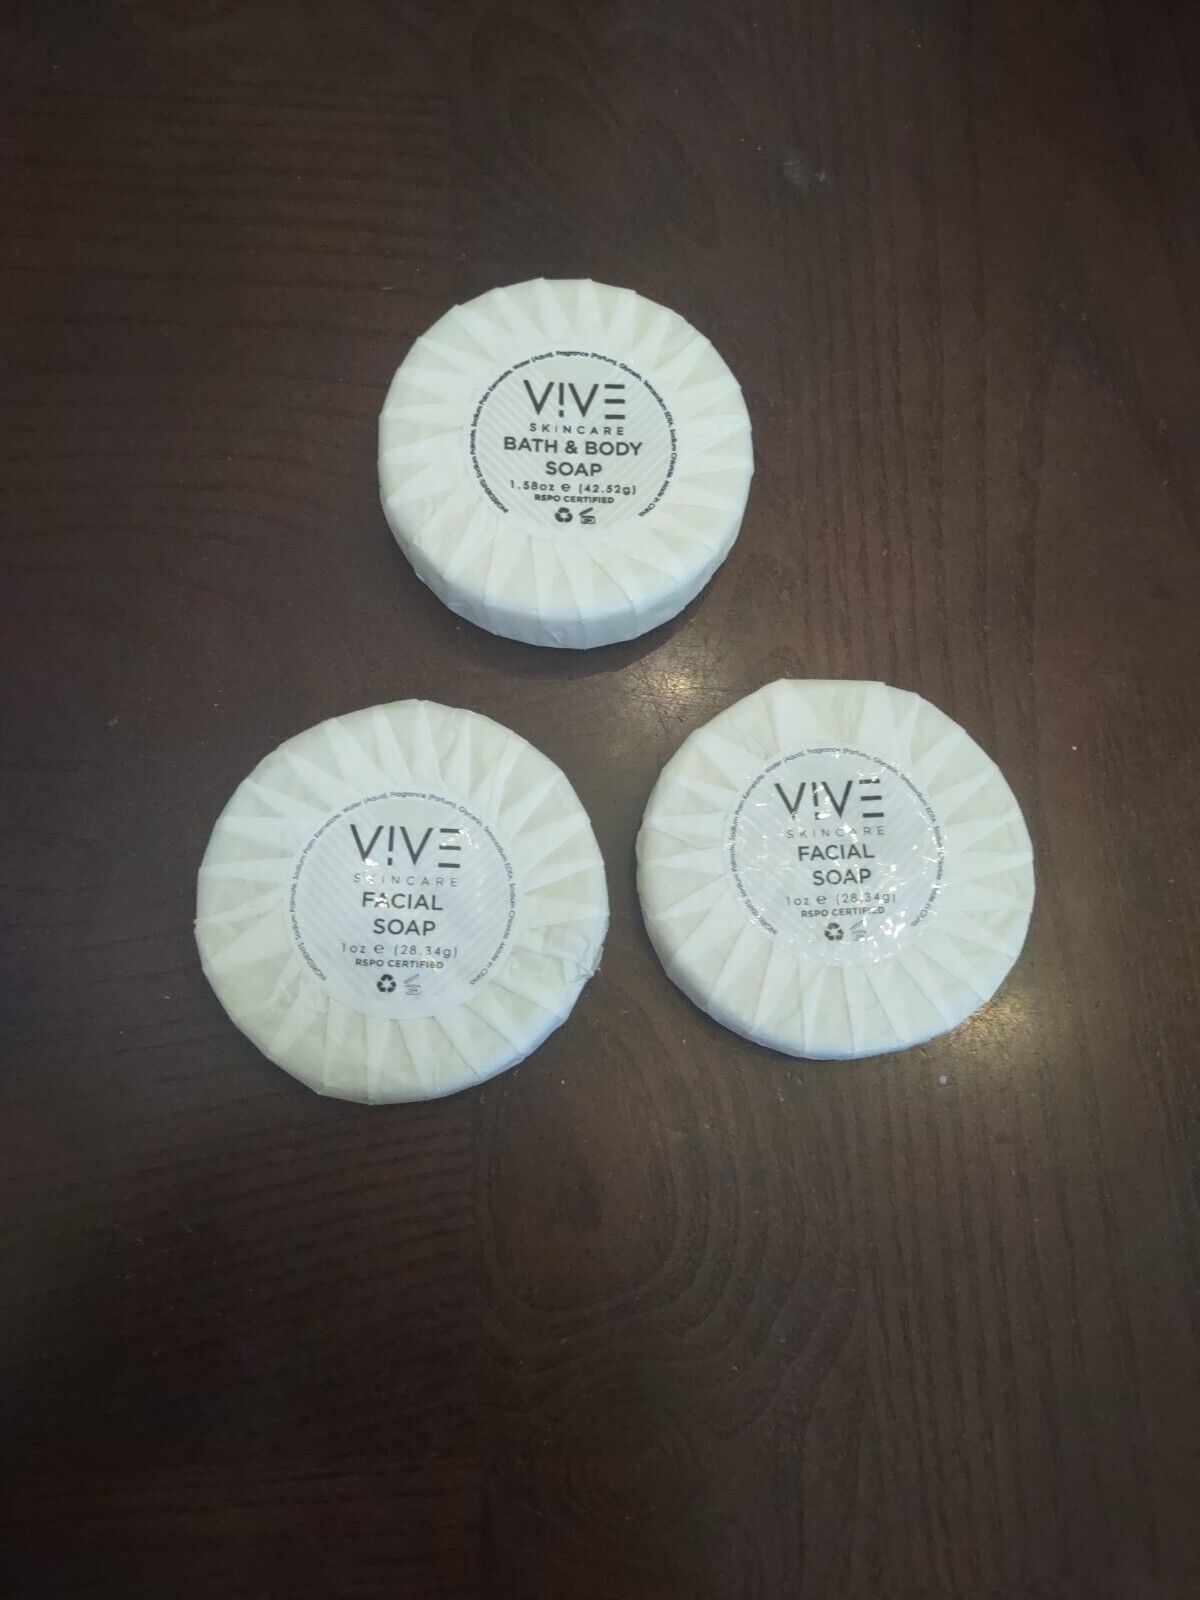 Lot Of 3 Vive Skincare 2 Facial Soaps And 1 Bath & Body Soap - $12.75